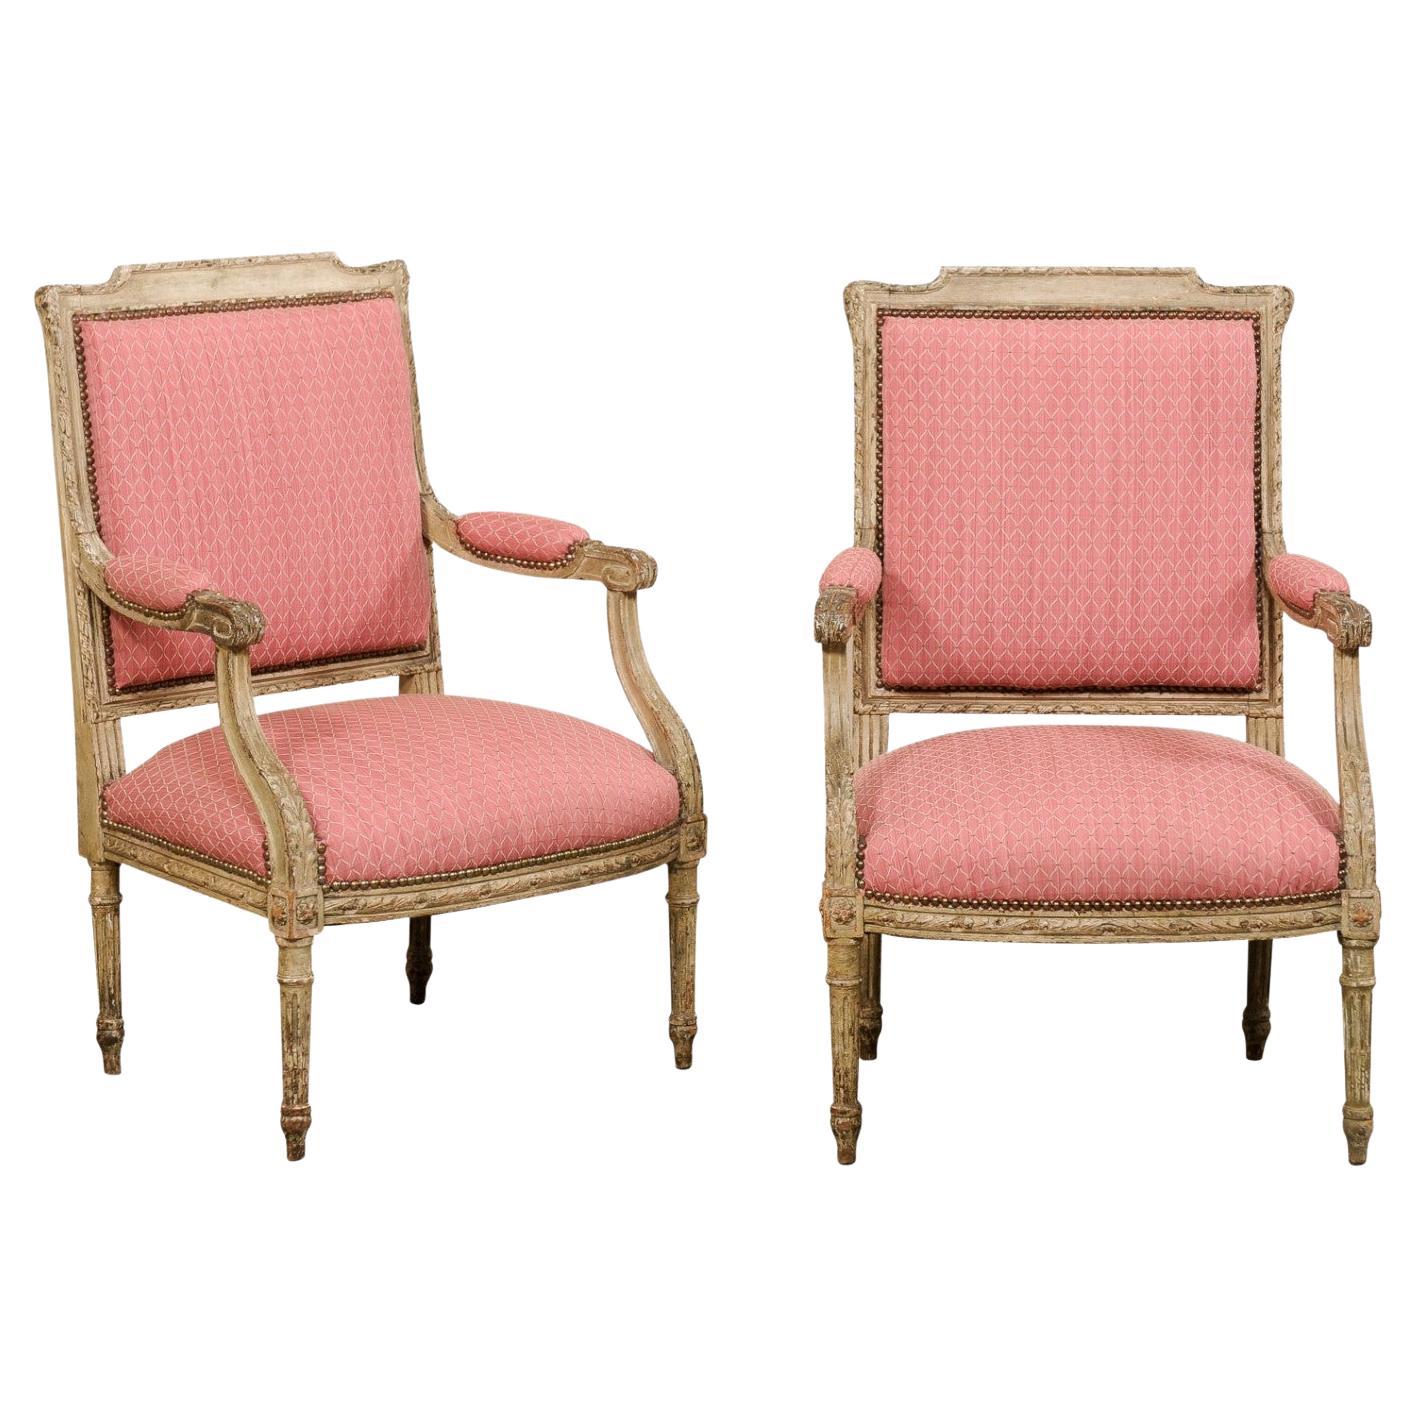 Antique French Pair of Louis XV Style Fauteuil Armchairs w/Original Wood Finish For Sale